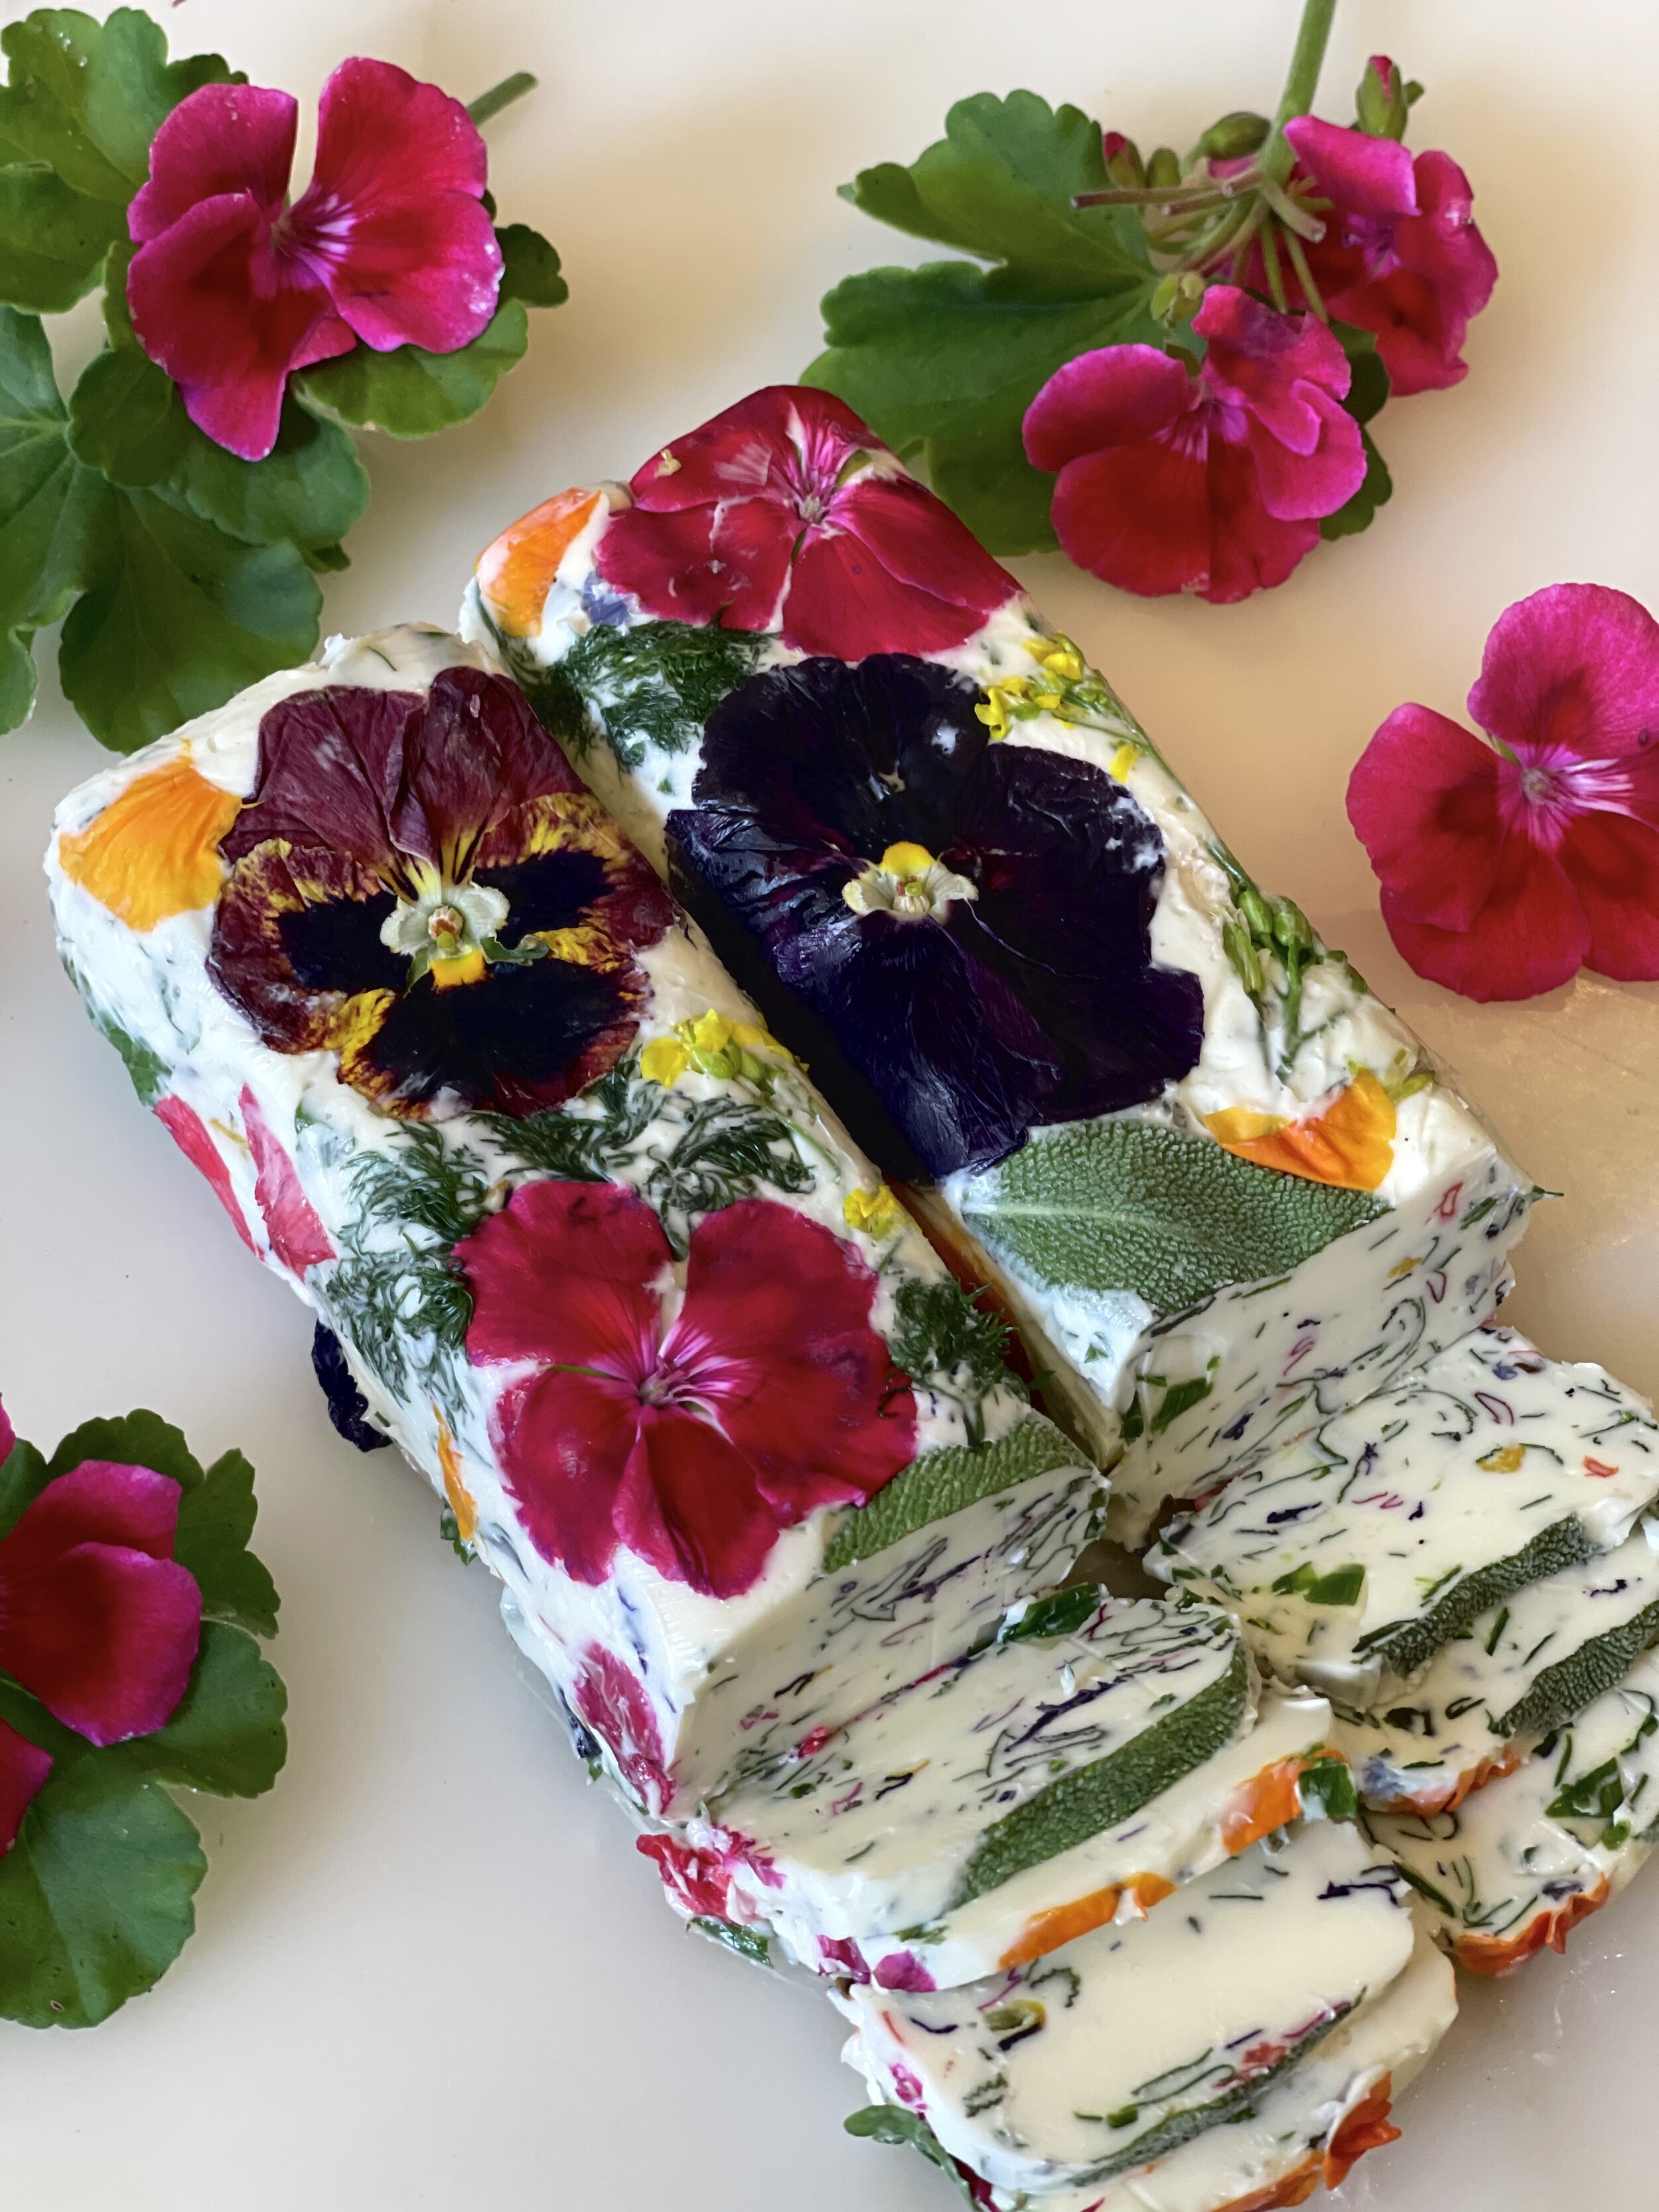 Garden Herb Compound Butter with Edible Flowers — An Explorer's Kitchen